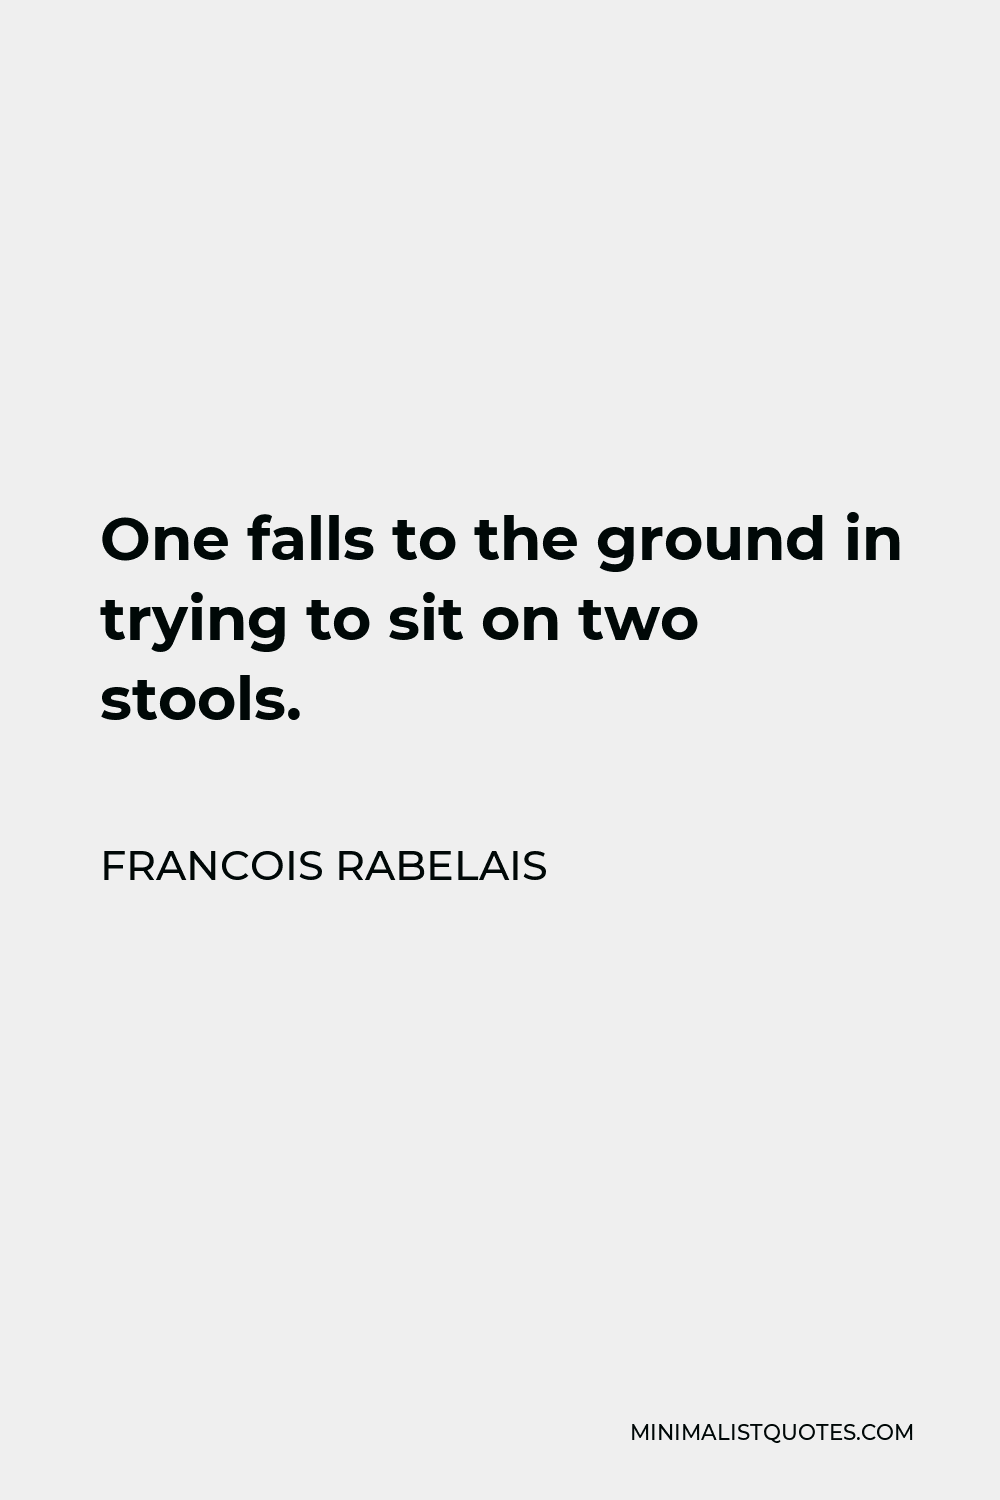 Francois Rabelais Quote - One falls to the ground in trying to sit on two stools.